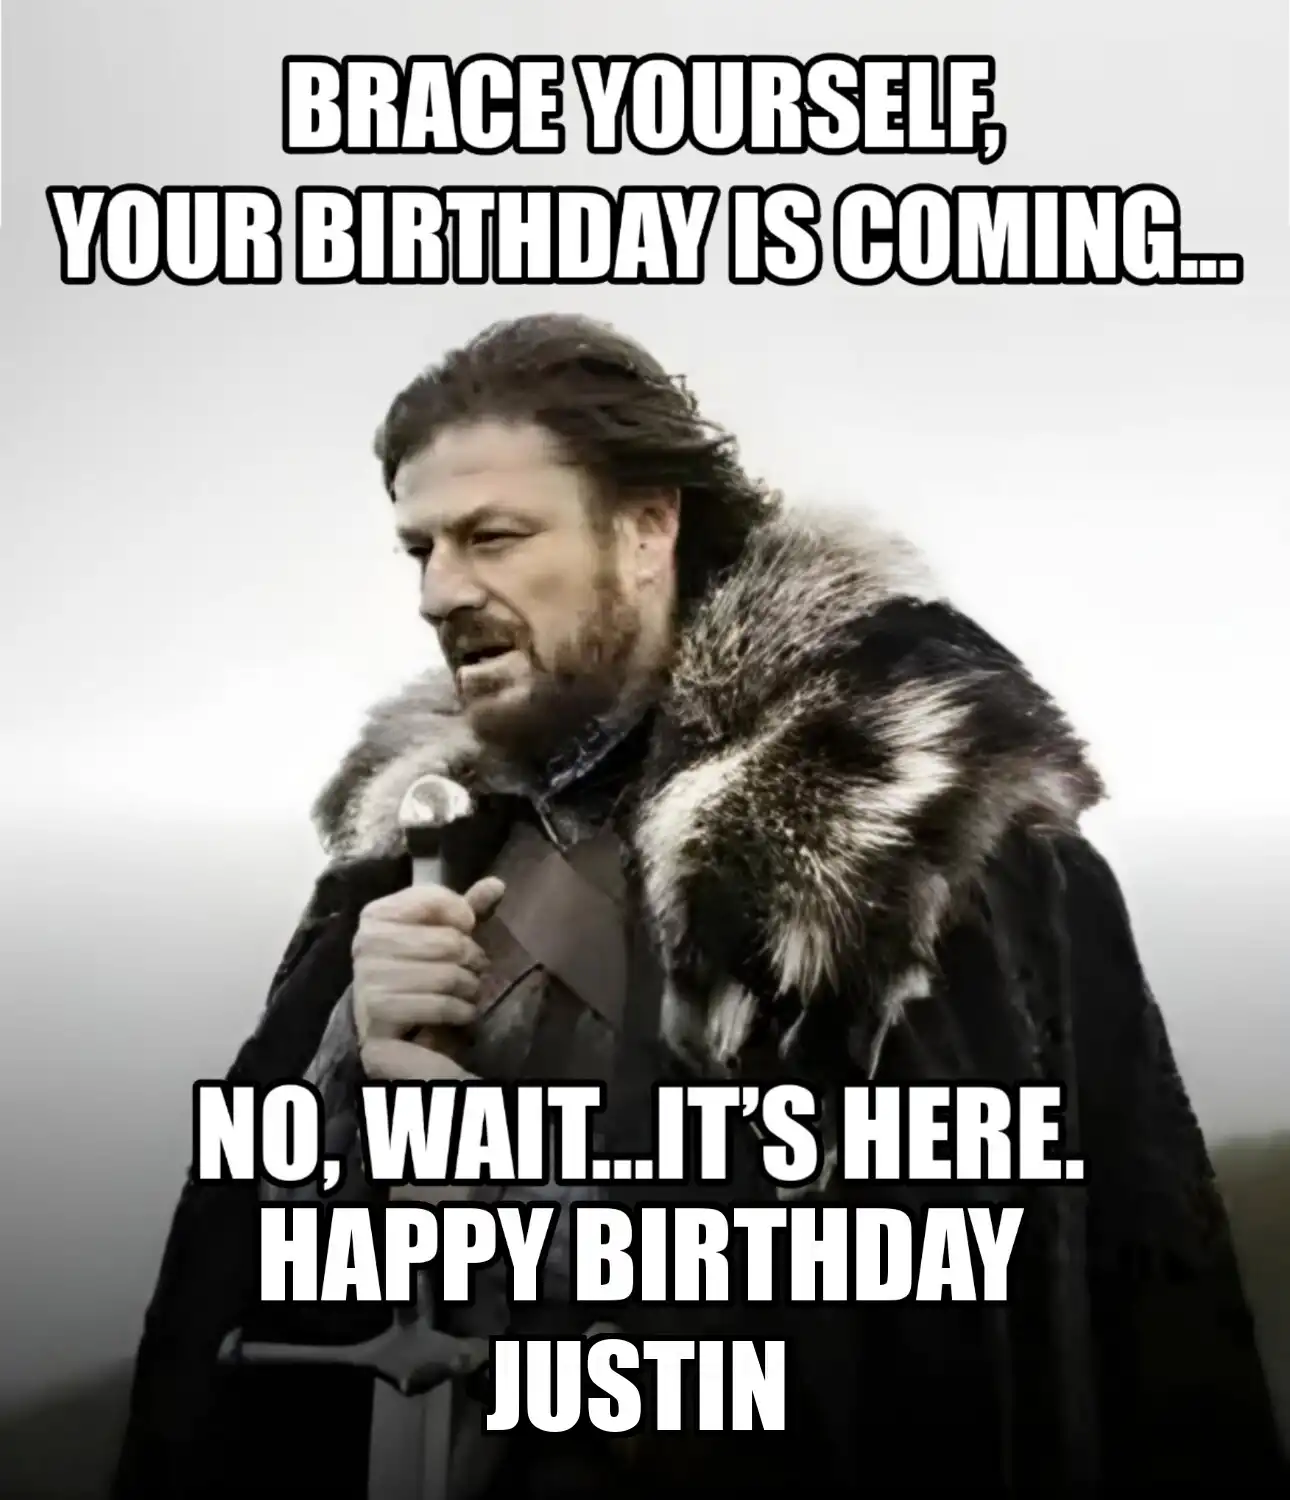 Happy Birthday Justin Brace Yourself Your Birthday Is Coming Meme